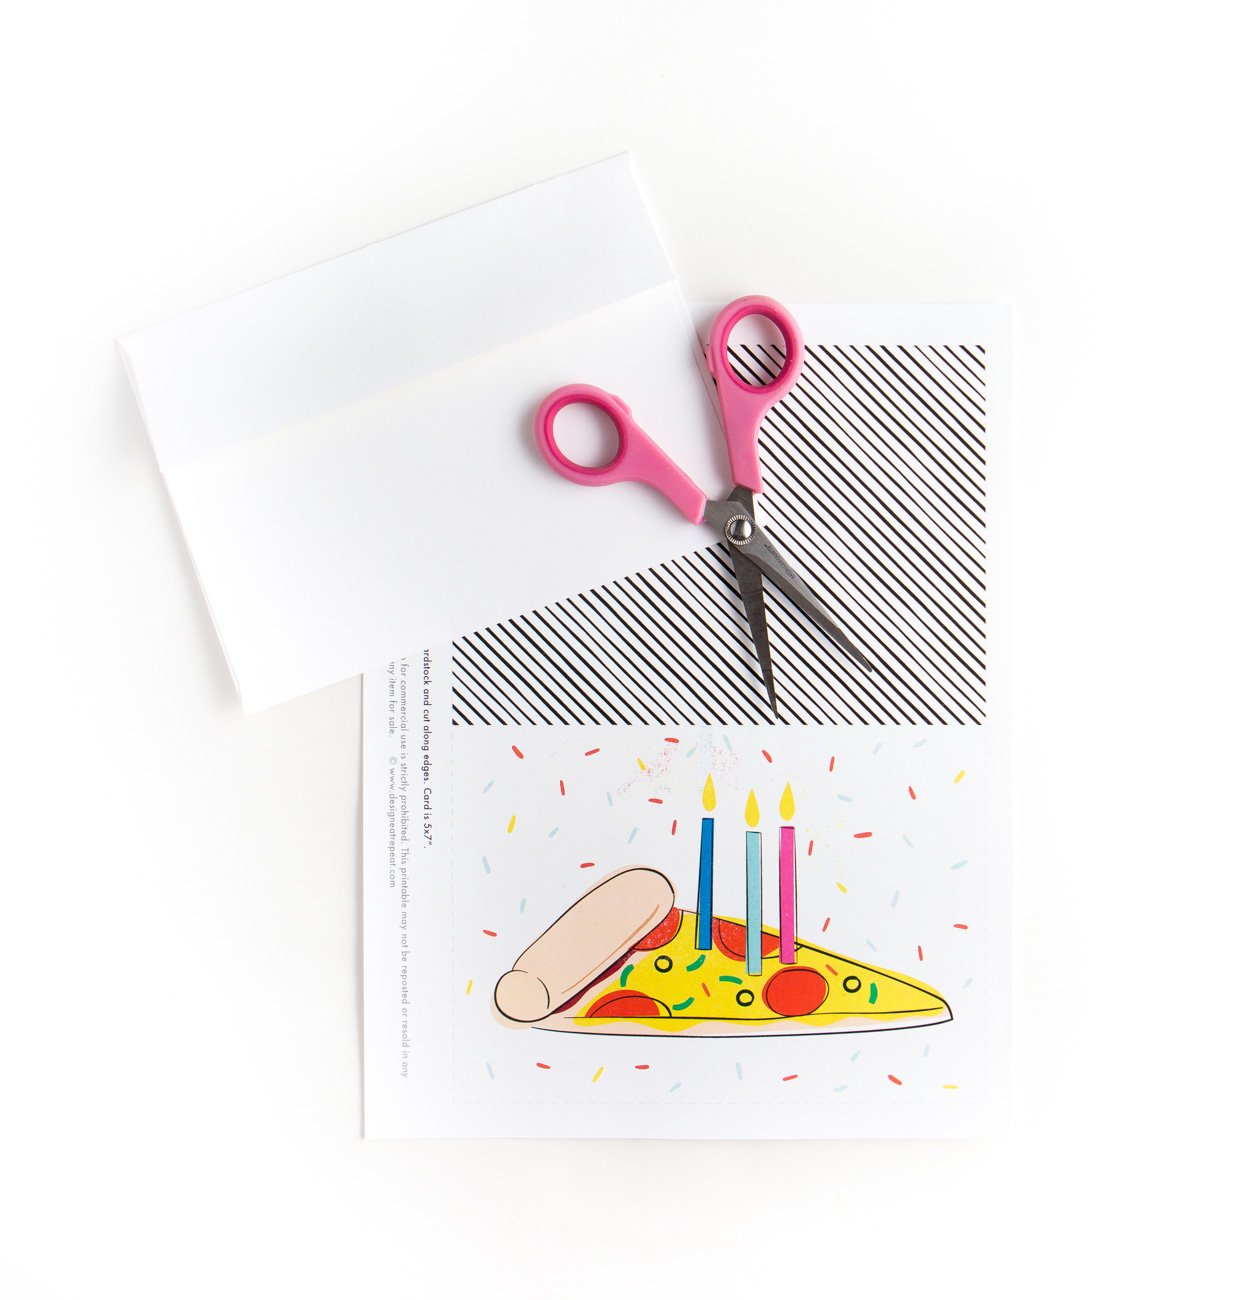 Printable birthday card with scissors. Colorful Pizza Printable Birthday Card with Candles and Sprinkles